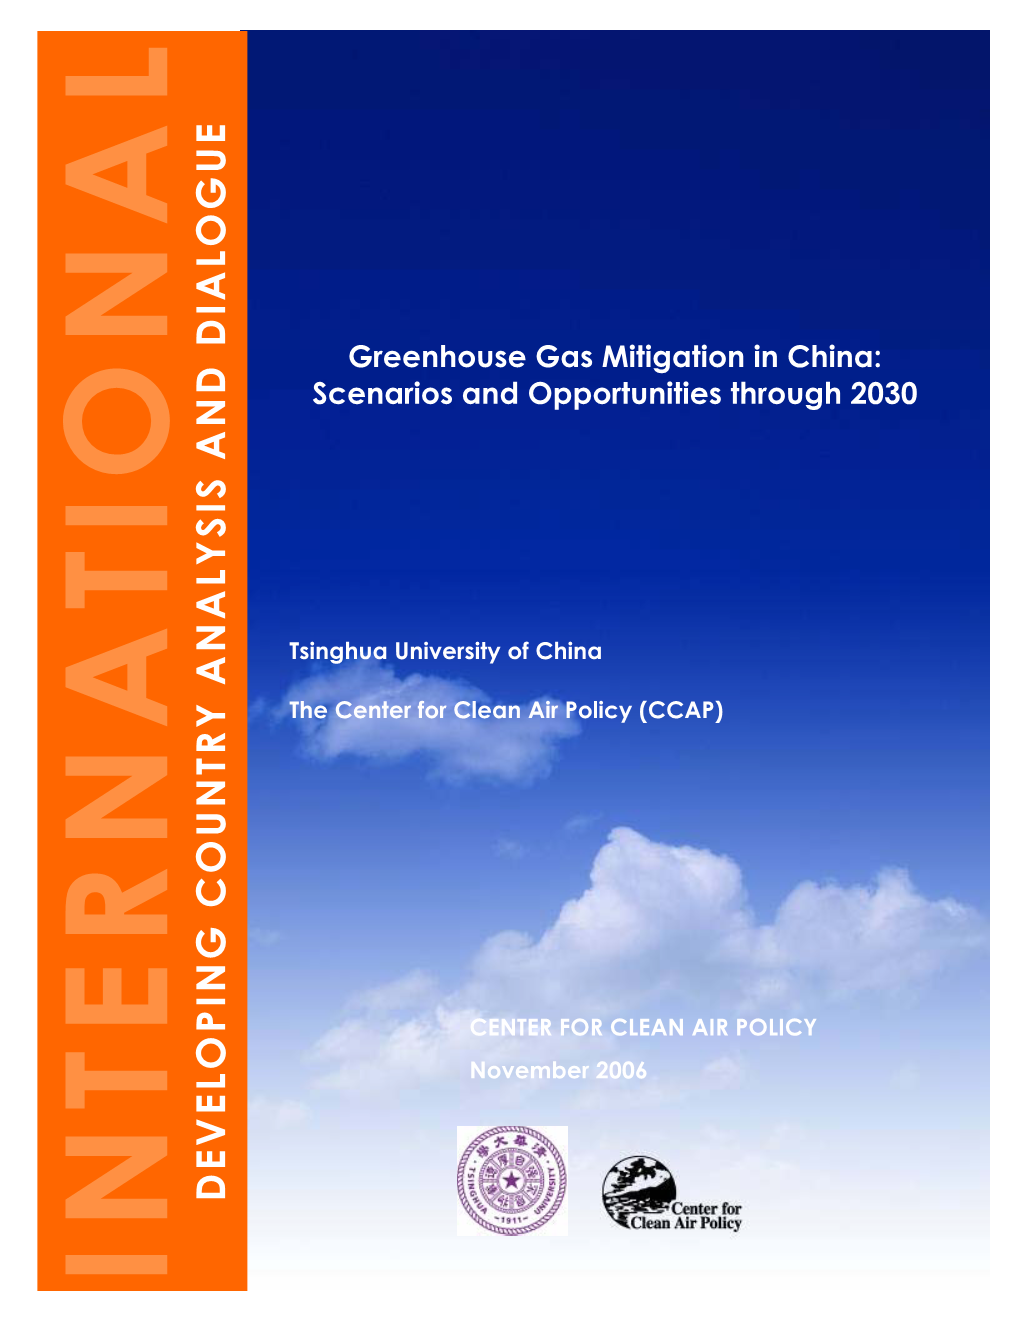 Greenhouse Gas Mitigation in China: Scenarios and Opportunities Through 2030